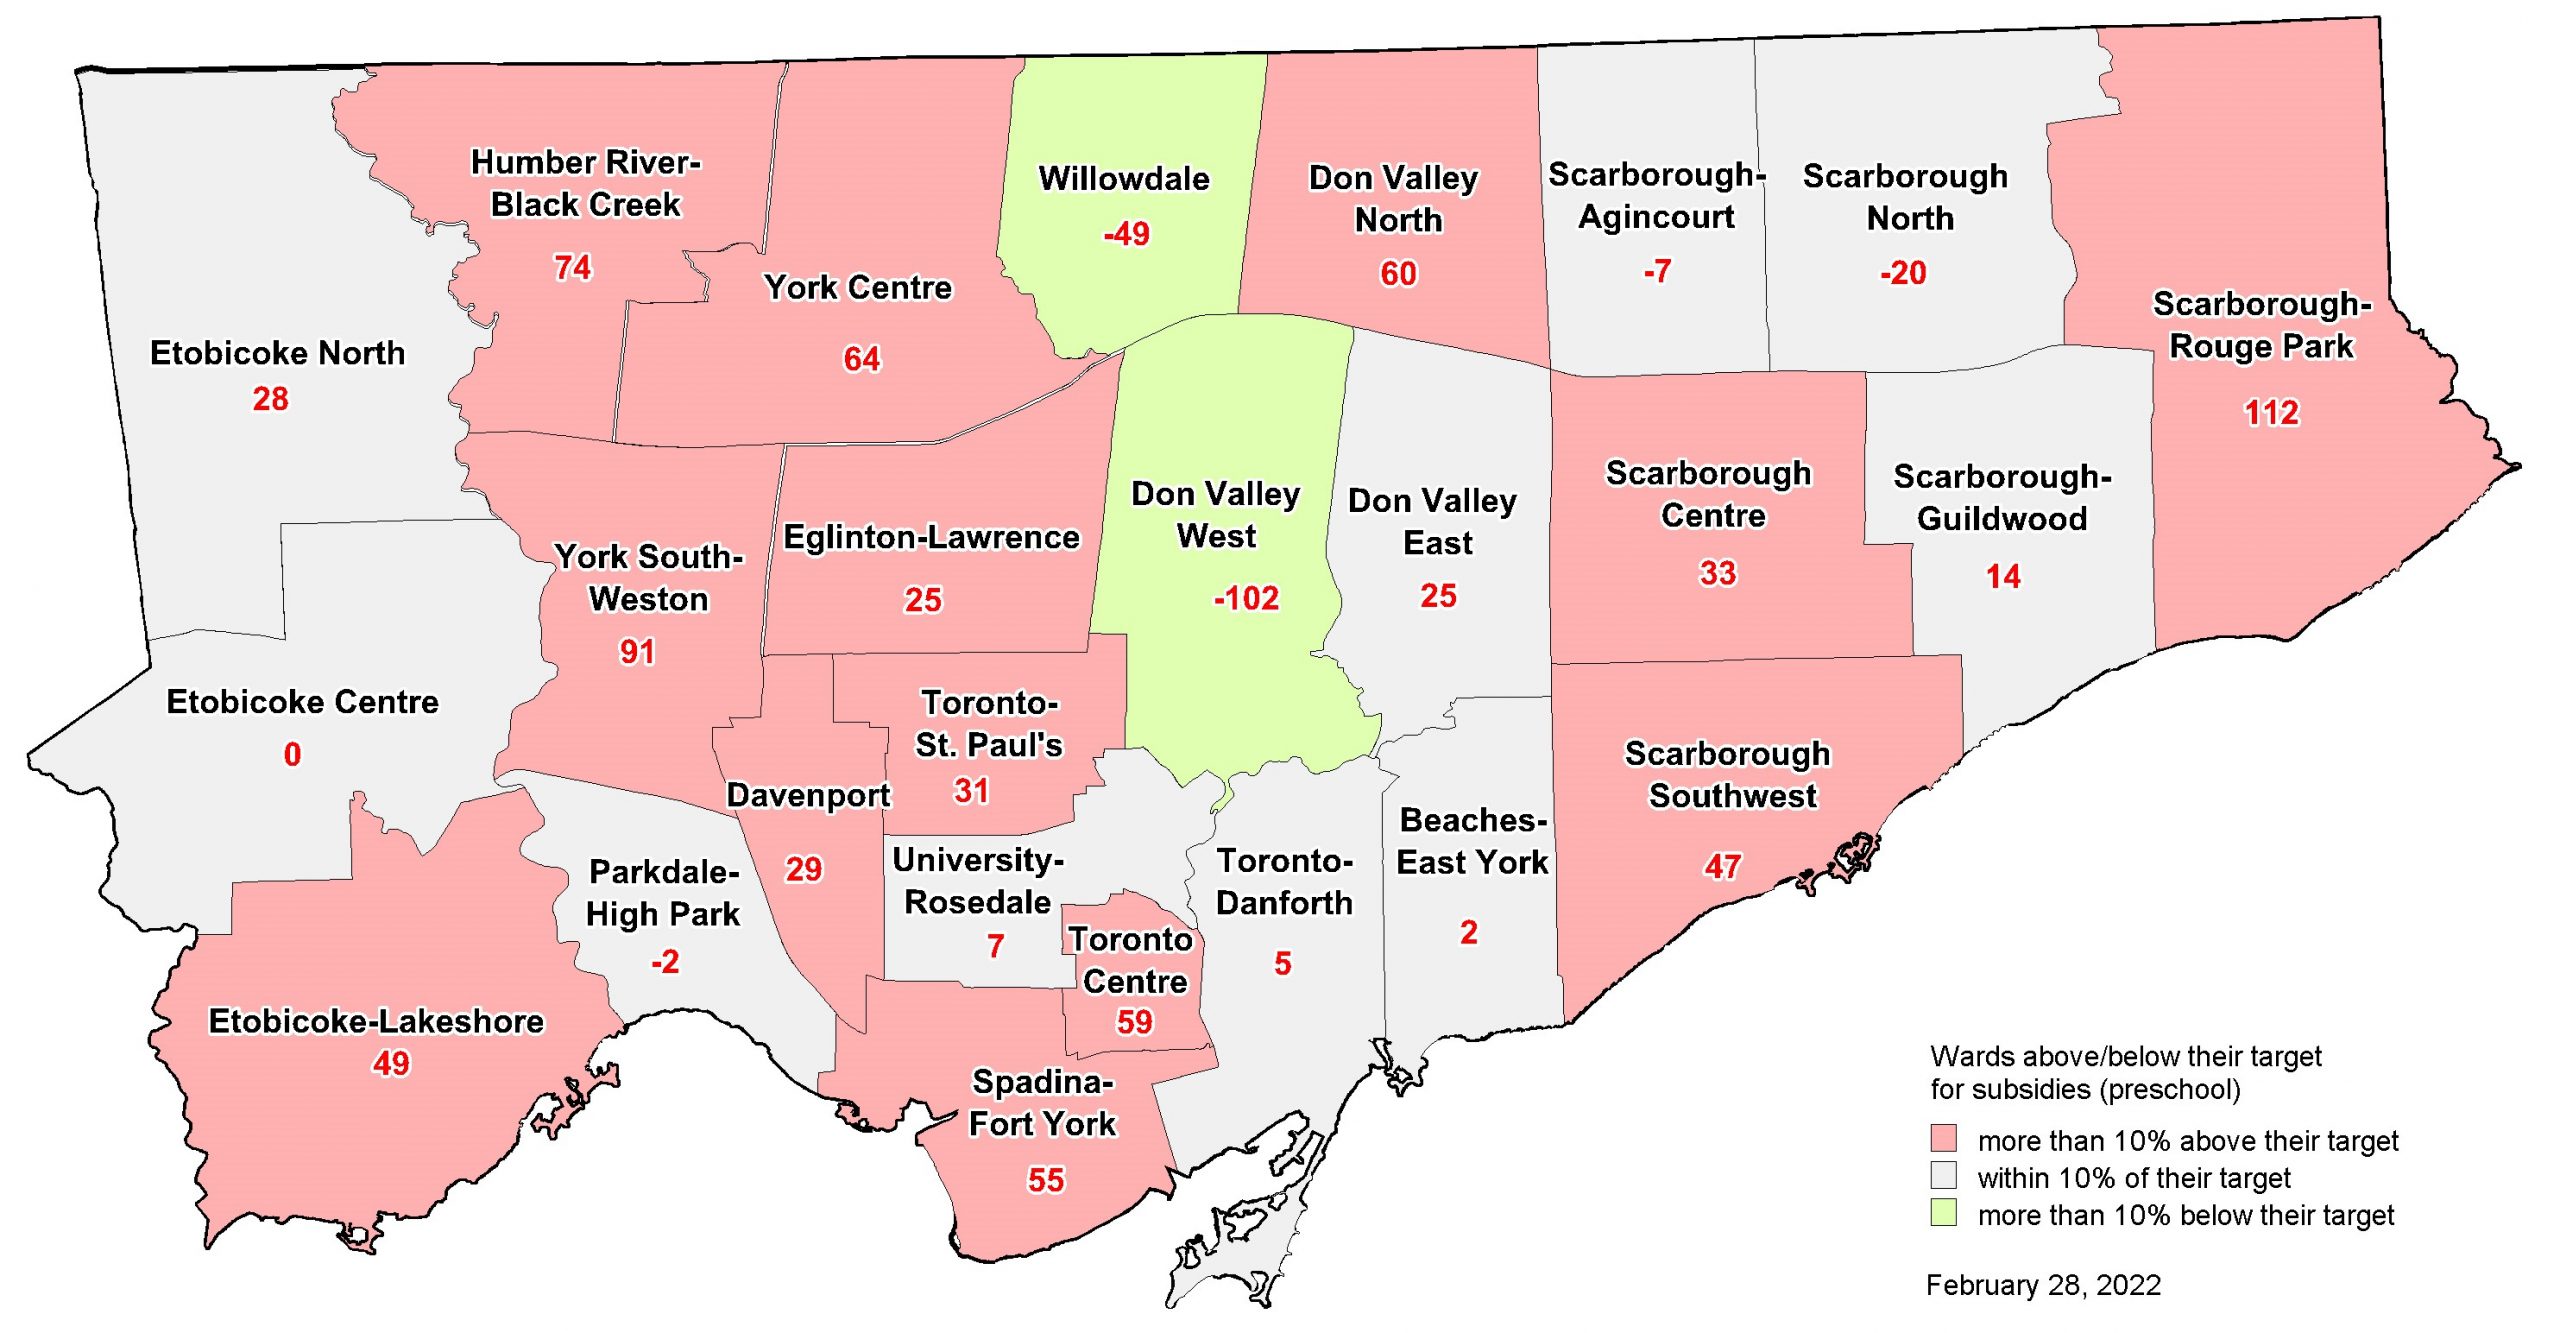 Map showing which wards are above, below or at their target number of subsidized preschool children. The data for this map can be found under the header - The Data Behind the Maps.